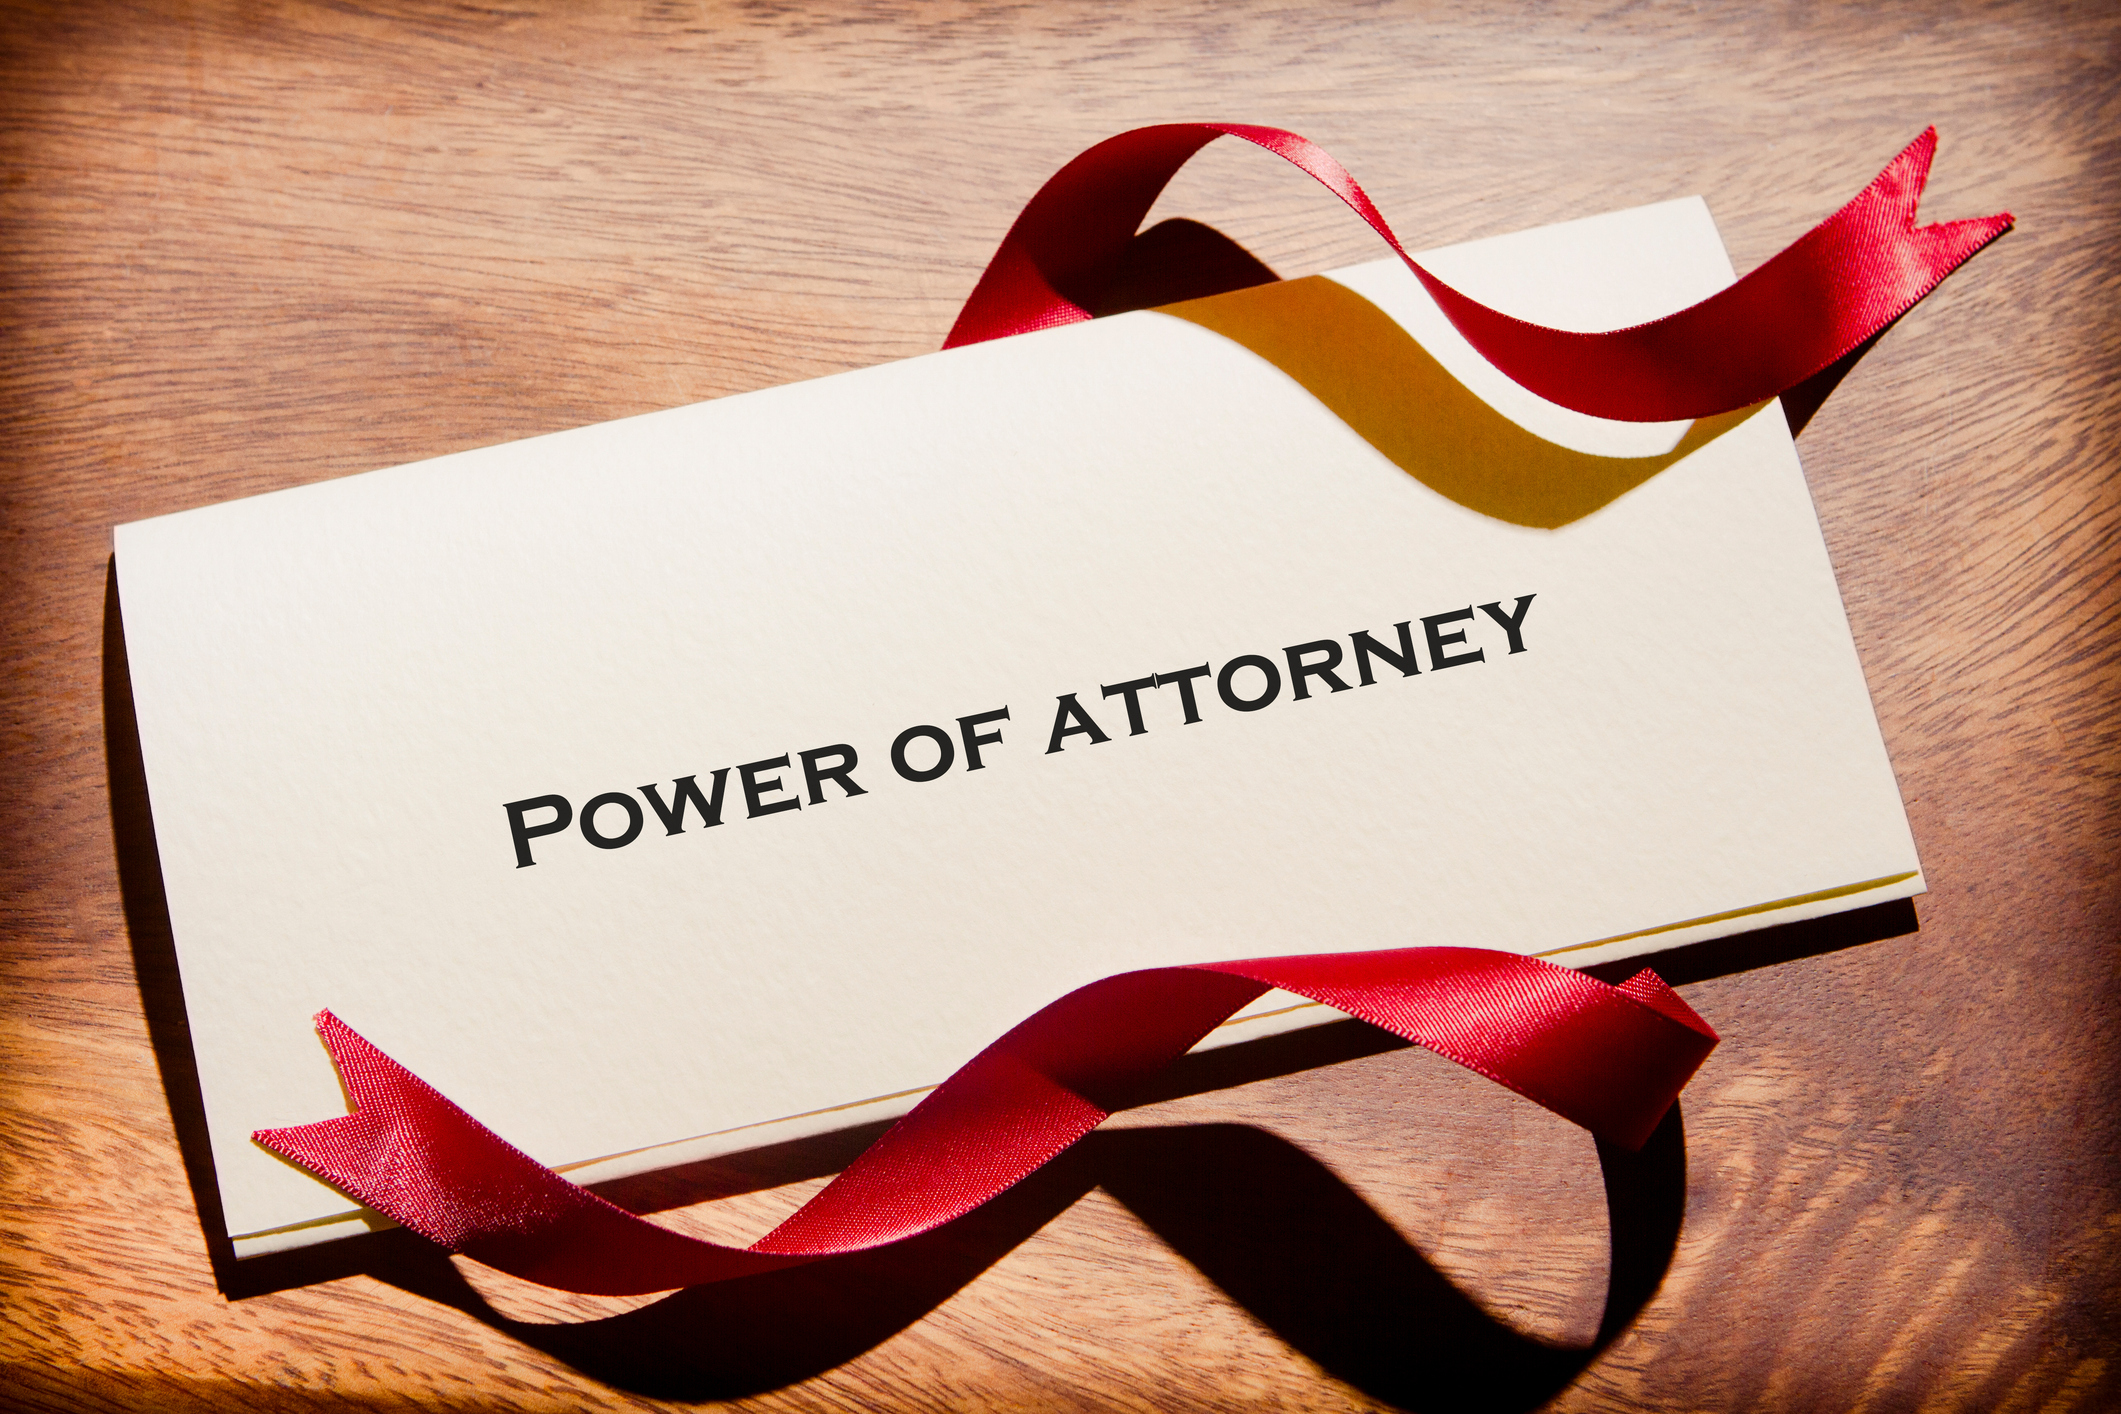 Powers of Attorney – Do I Need One?